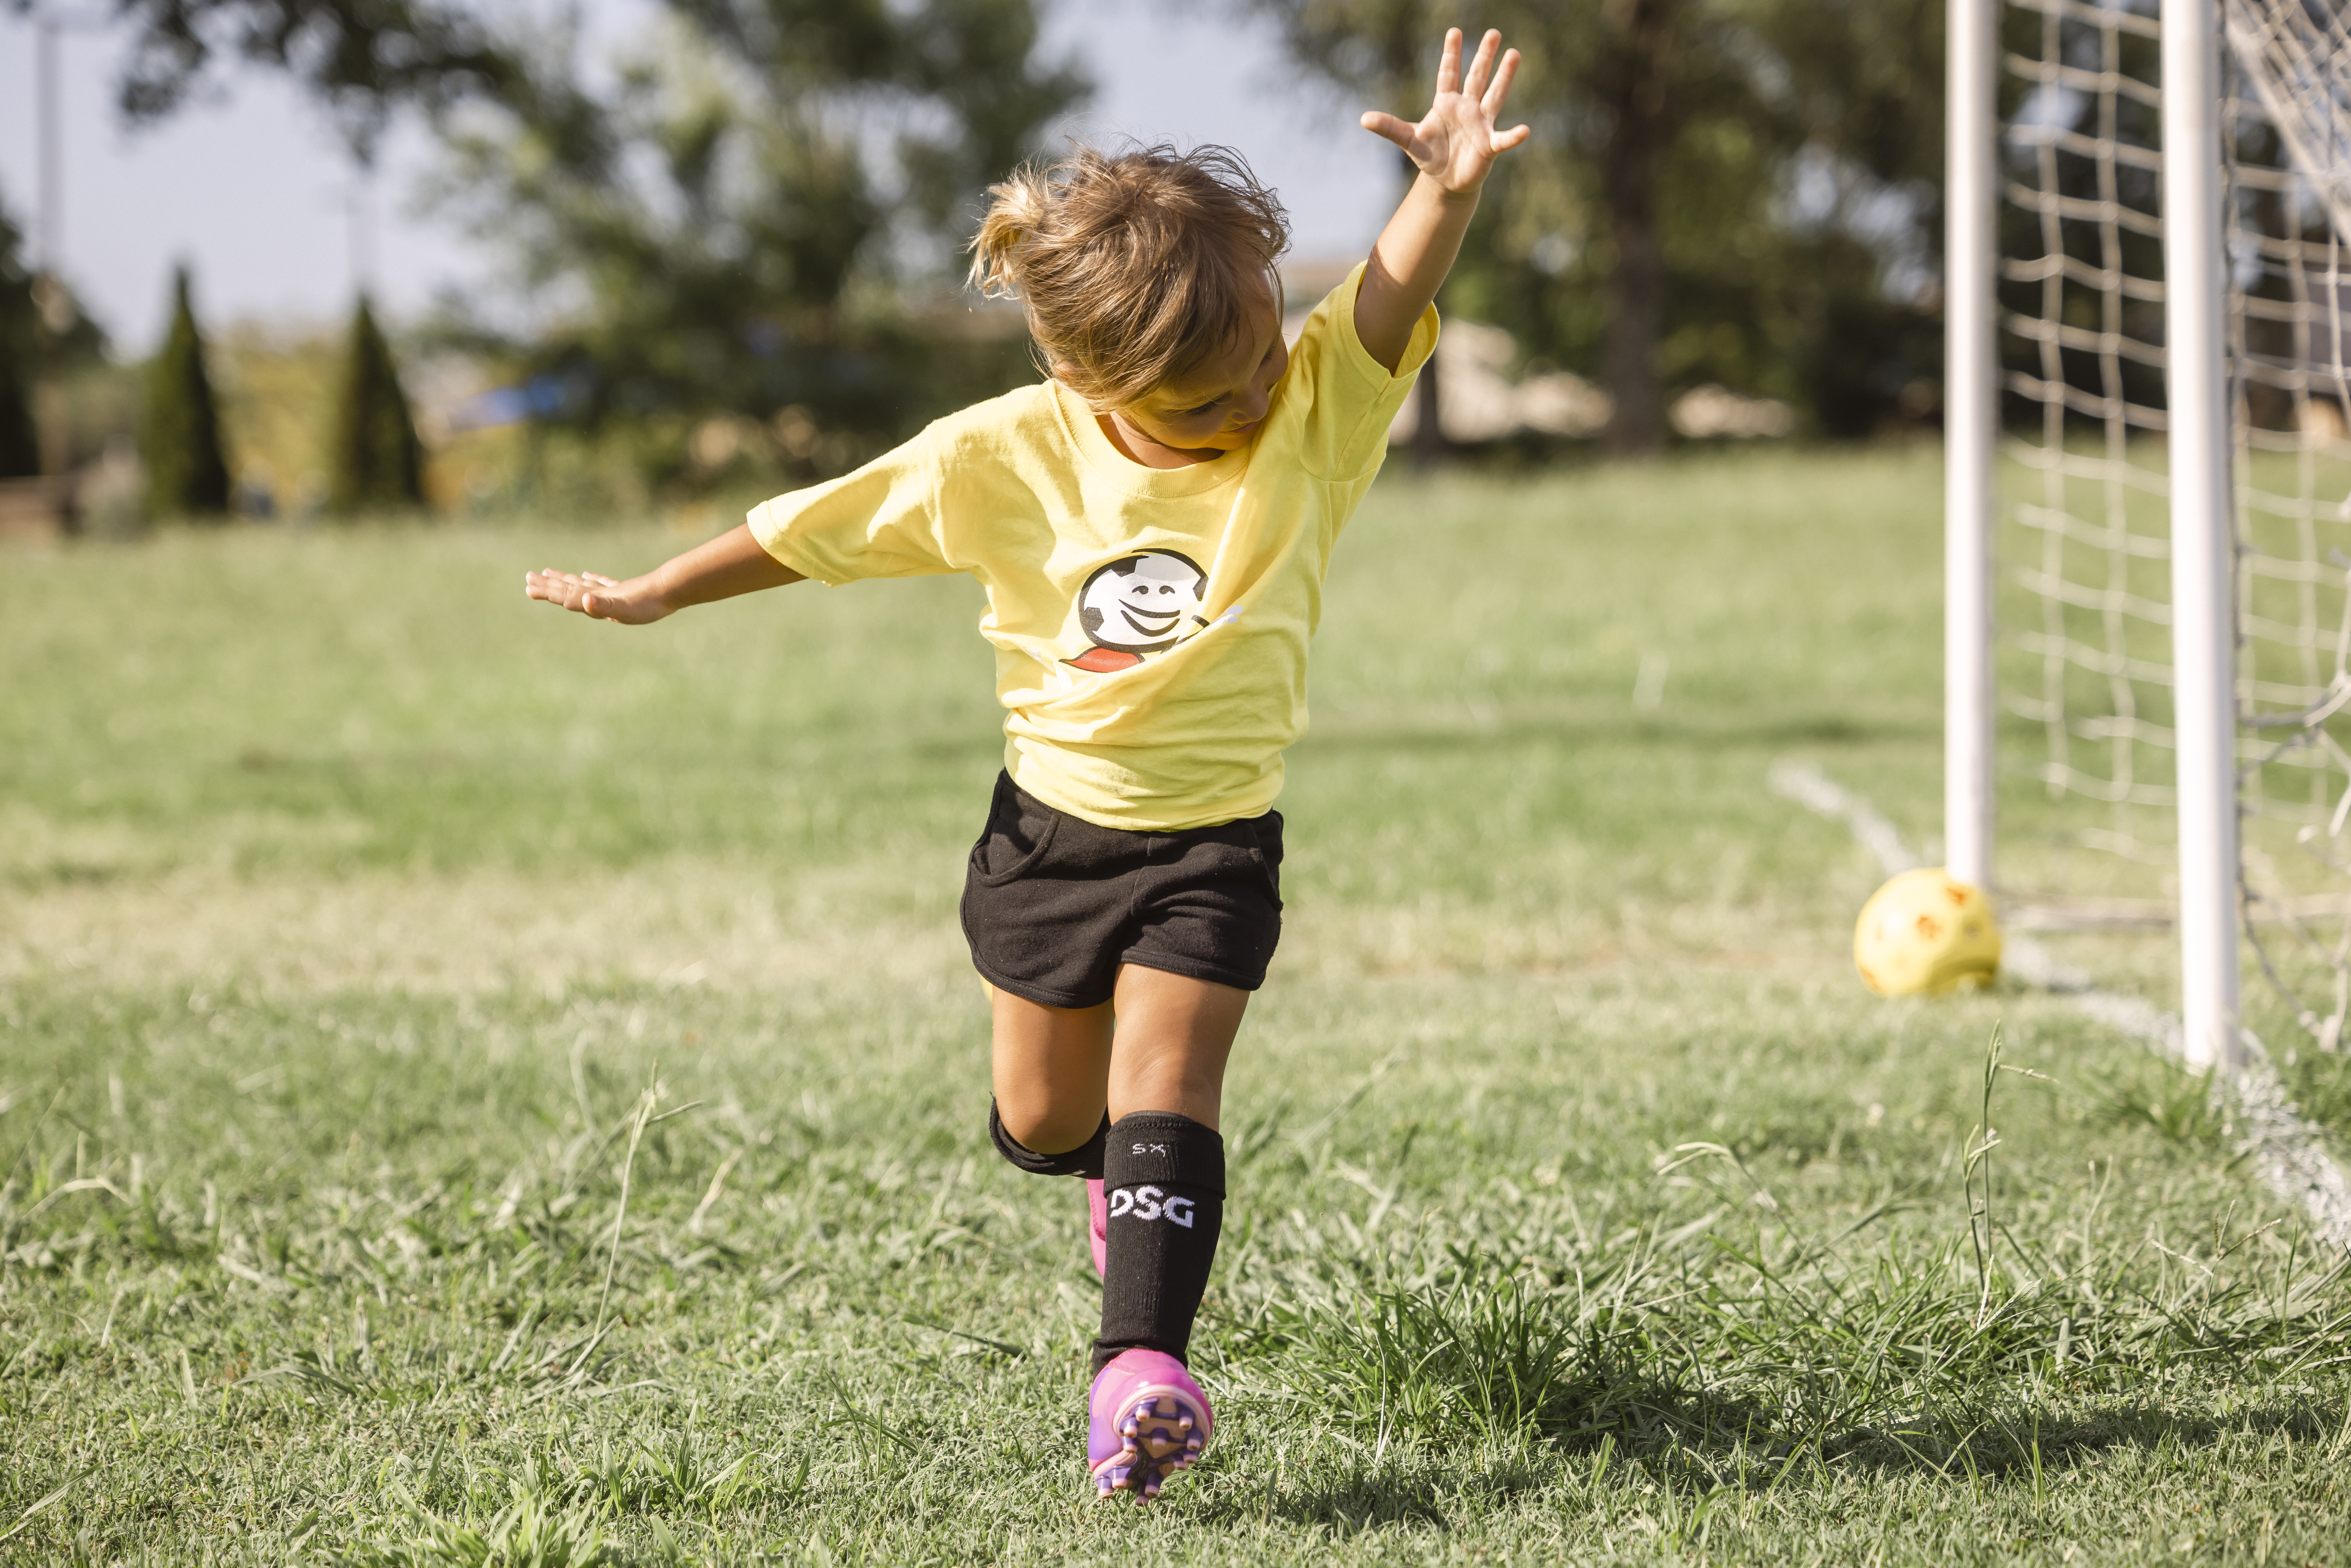 2 year old girl kid celebrates after scoring her first goal in soccer